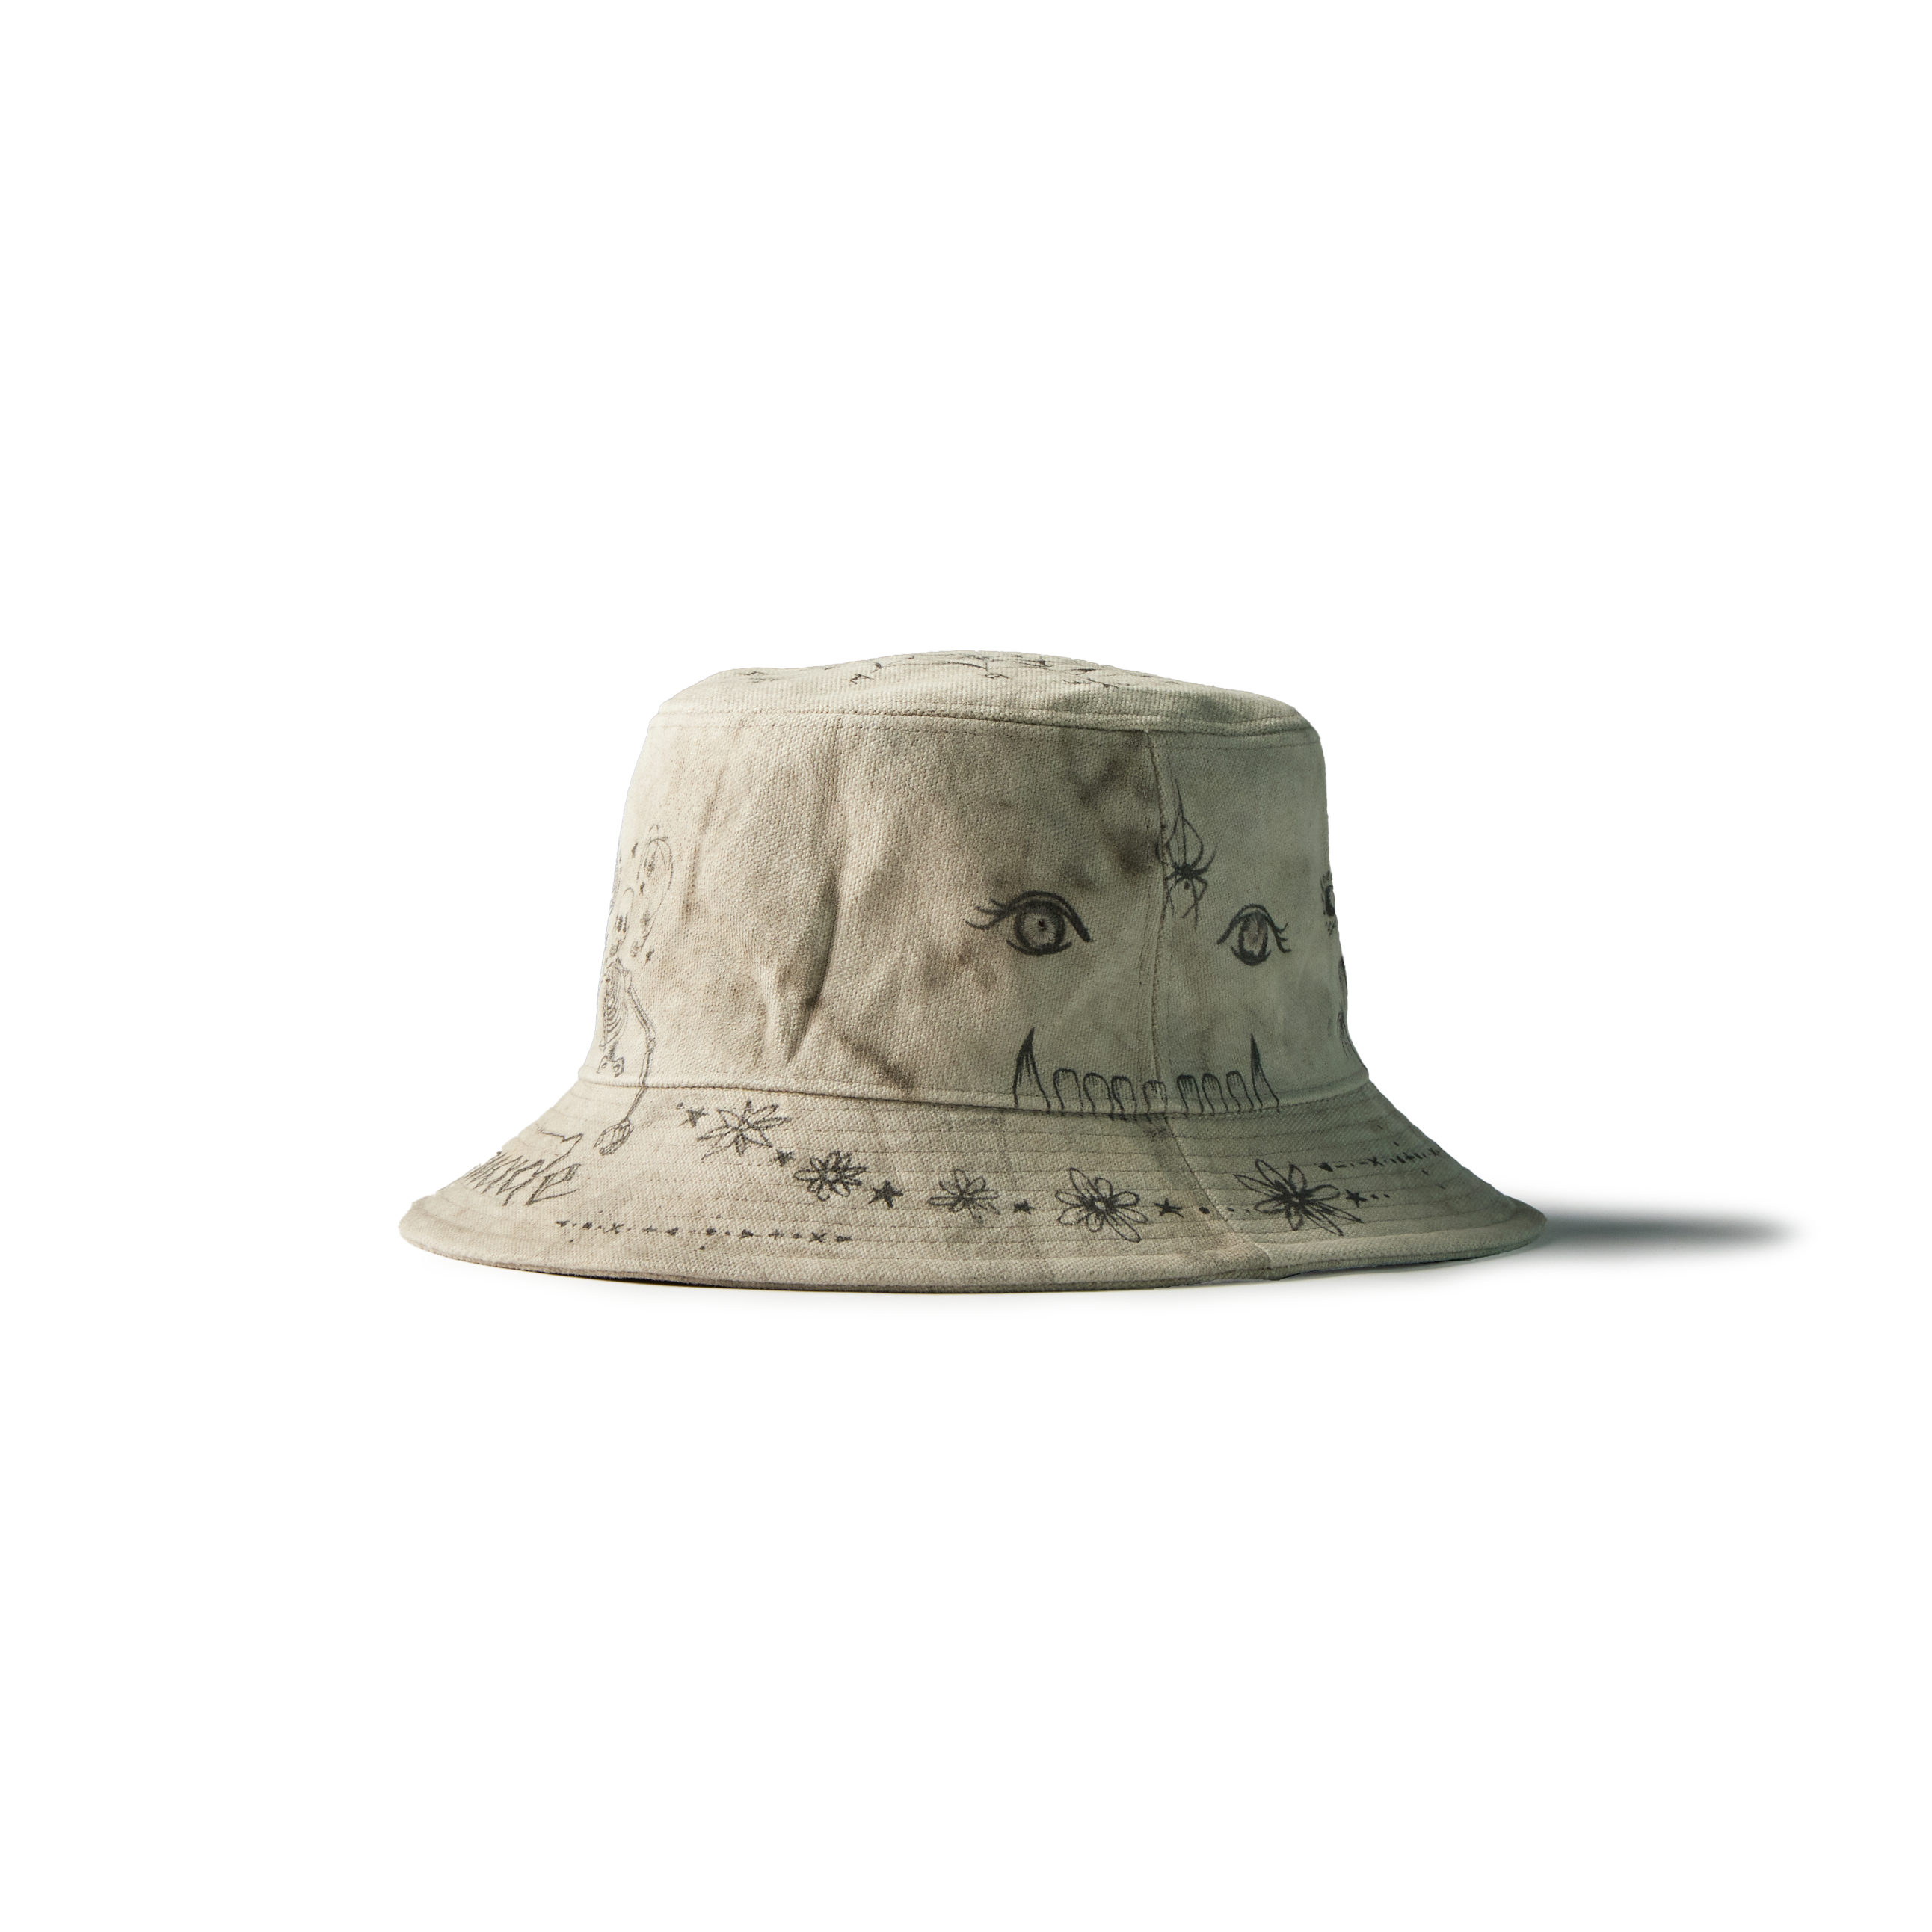 READYMADE - Dr. Woo Bucket Hat product image